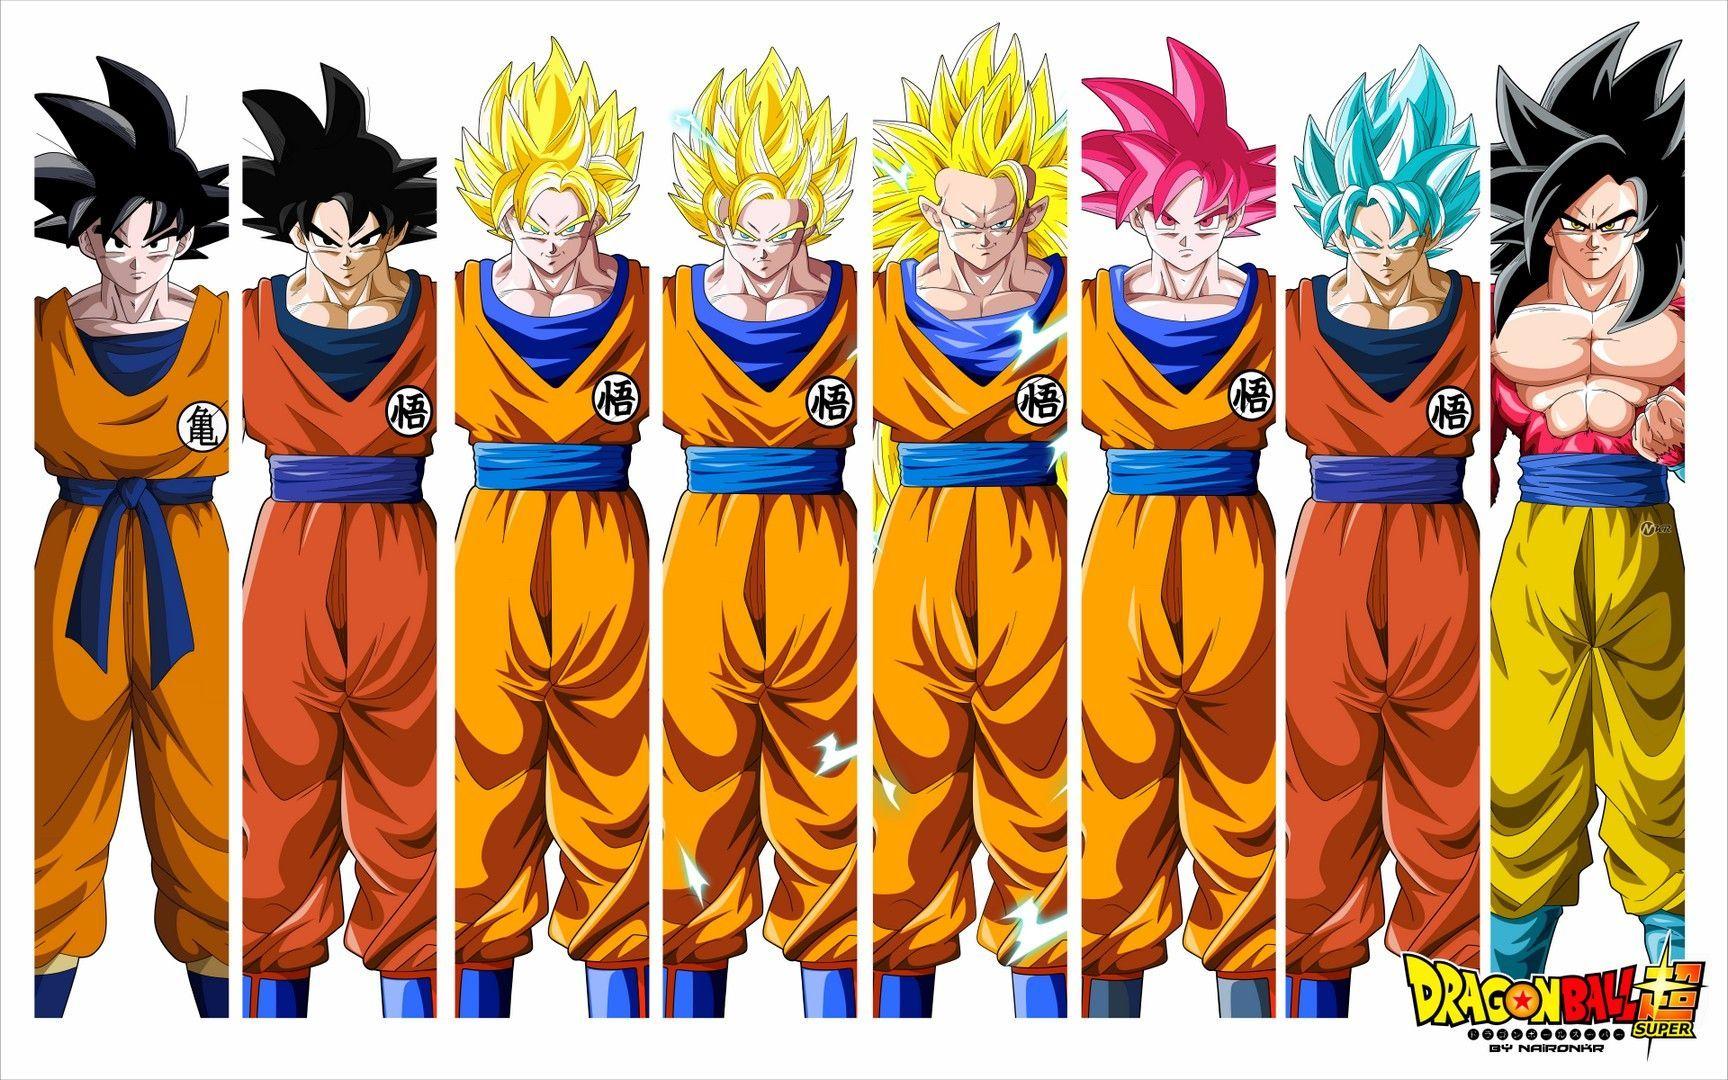 Goku All Form Wallpaper HD on All Forms Of Evil Goku